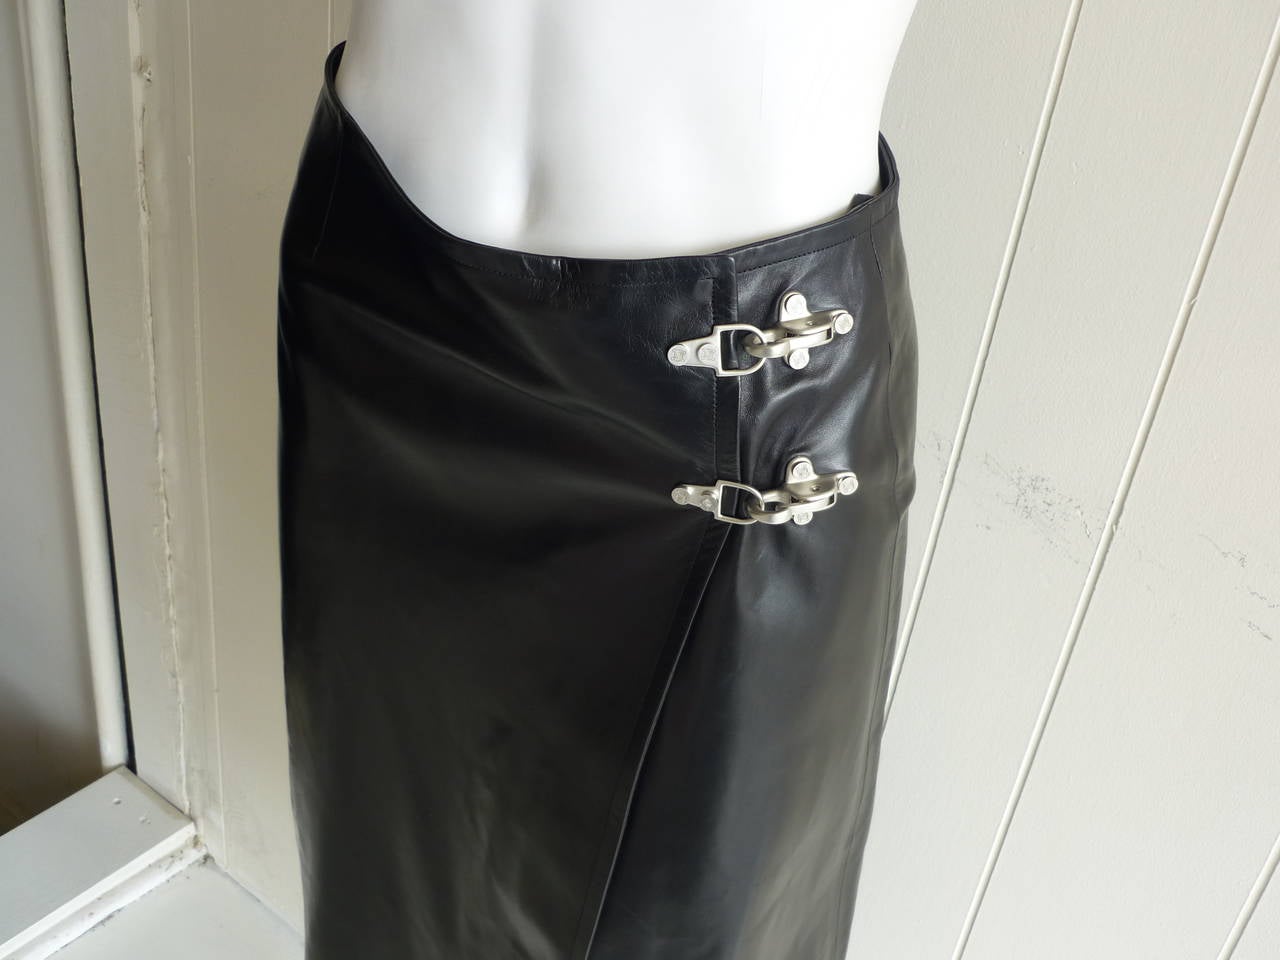 Beautiful lined lambskin wrap skirt with silver hardware fastening incised with the Celine logo.

The fit is slightly assymetrical allowing the leg to peep out at the bottom.